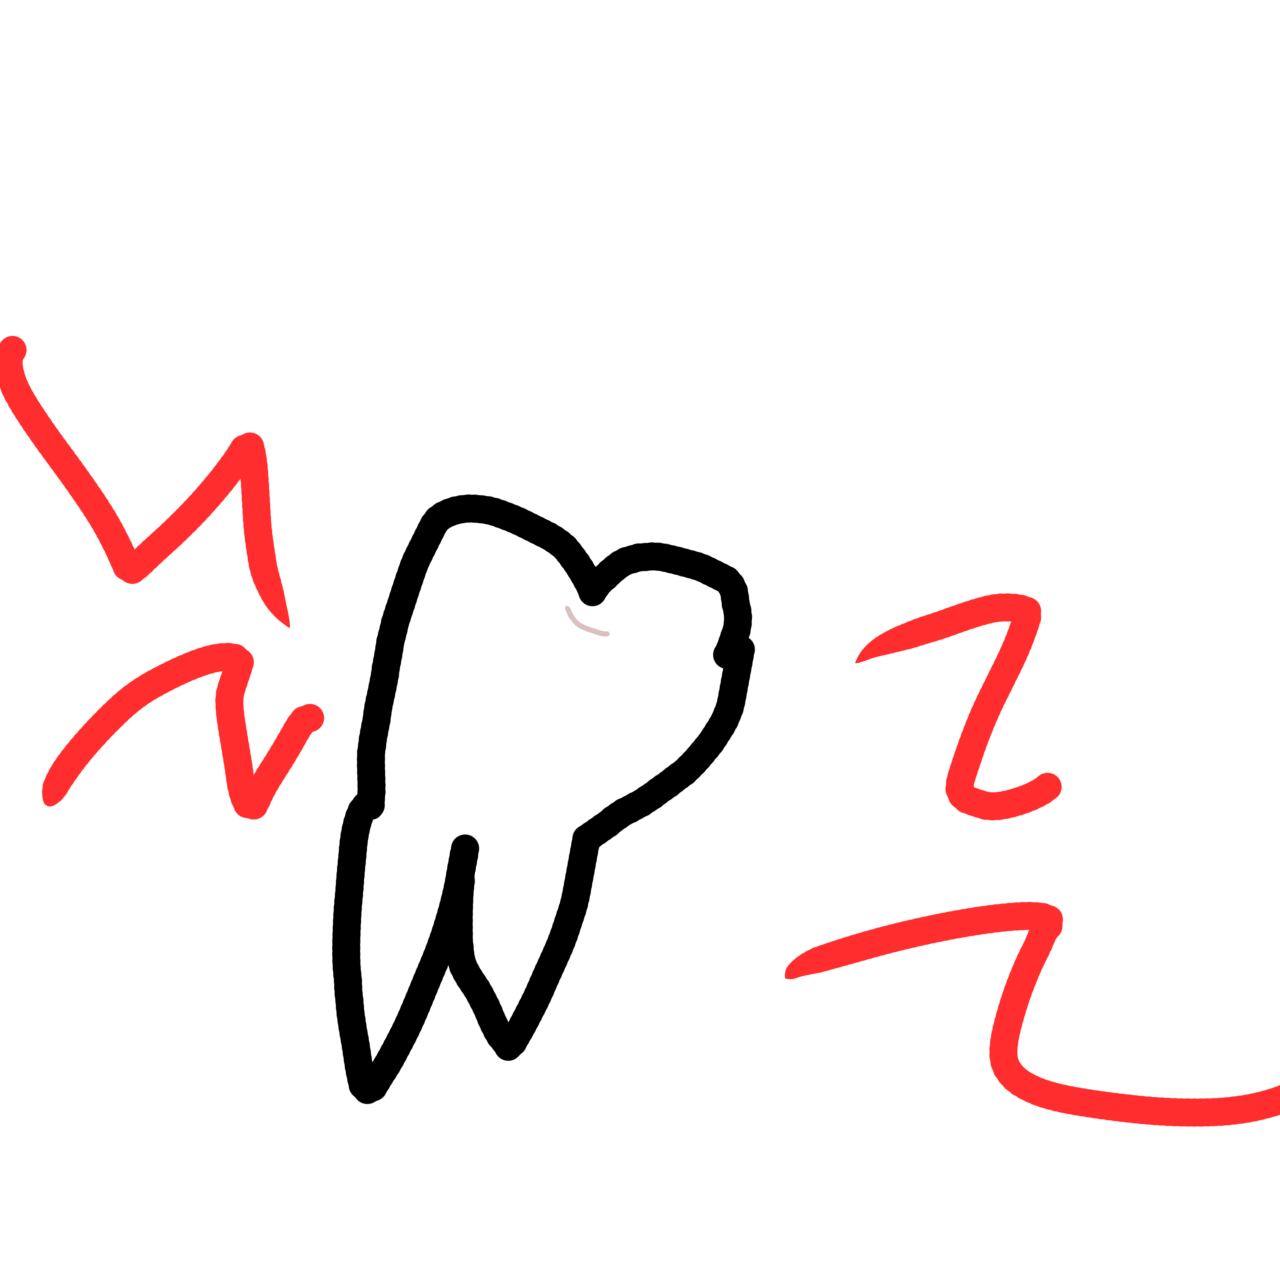 a symbol of a white tooth with jagged red lines around it.